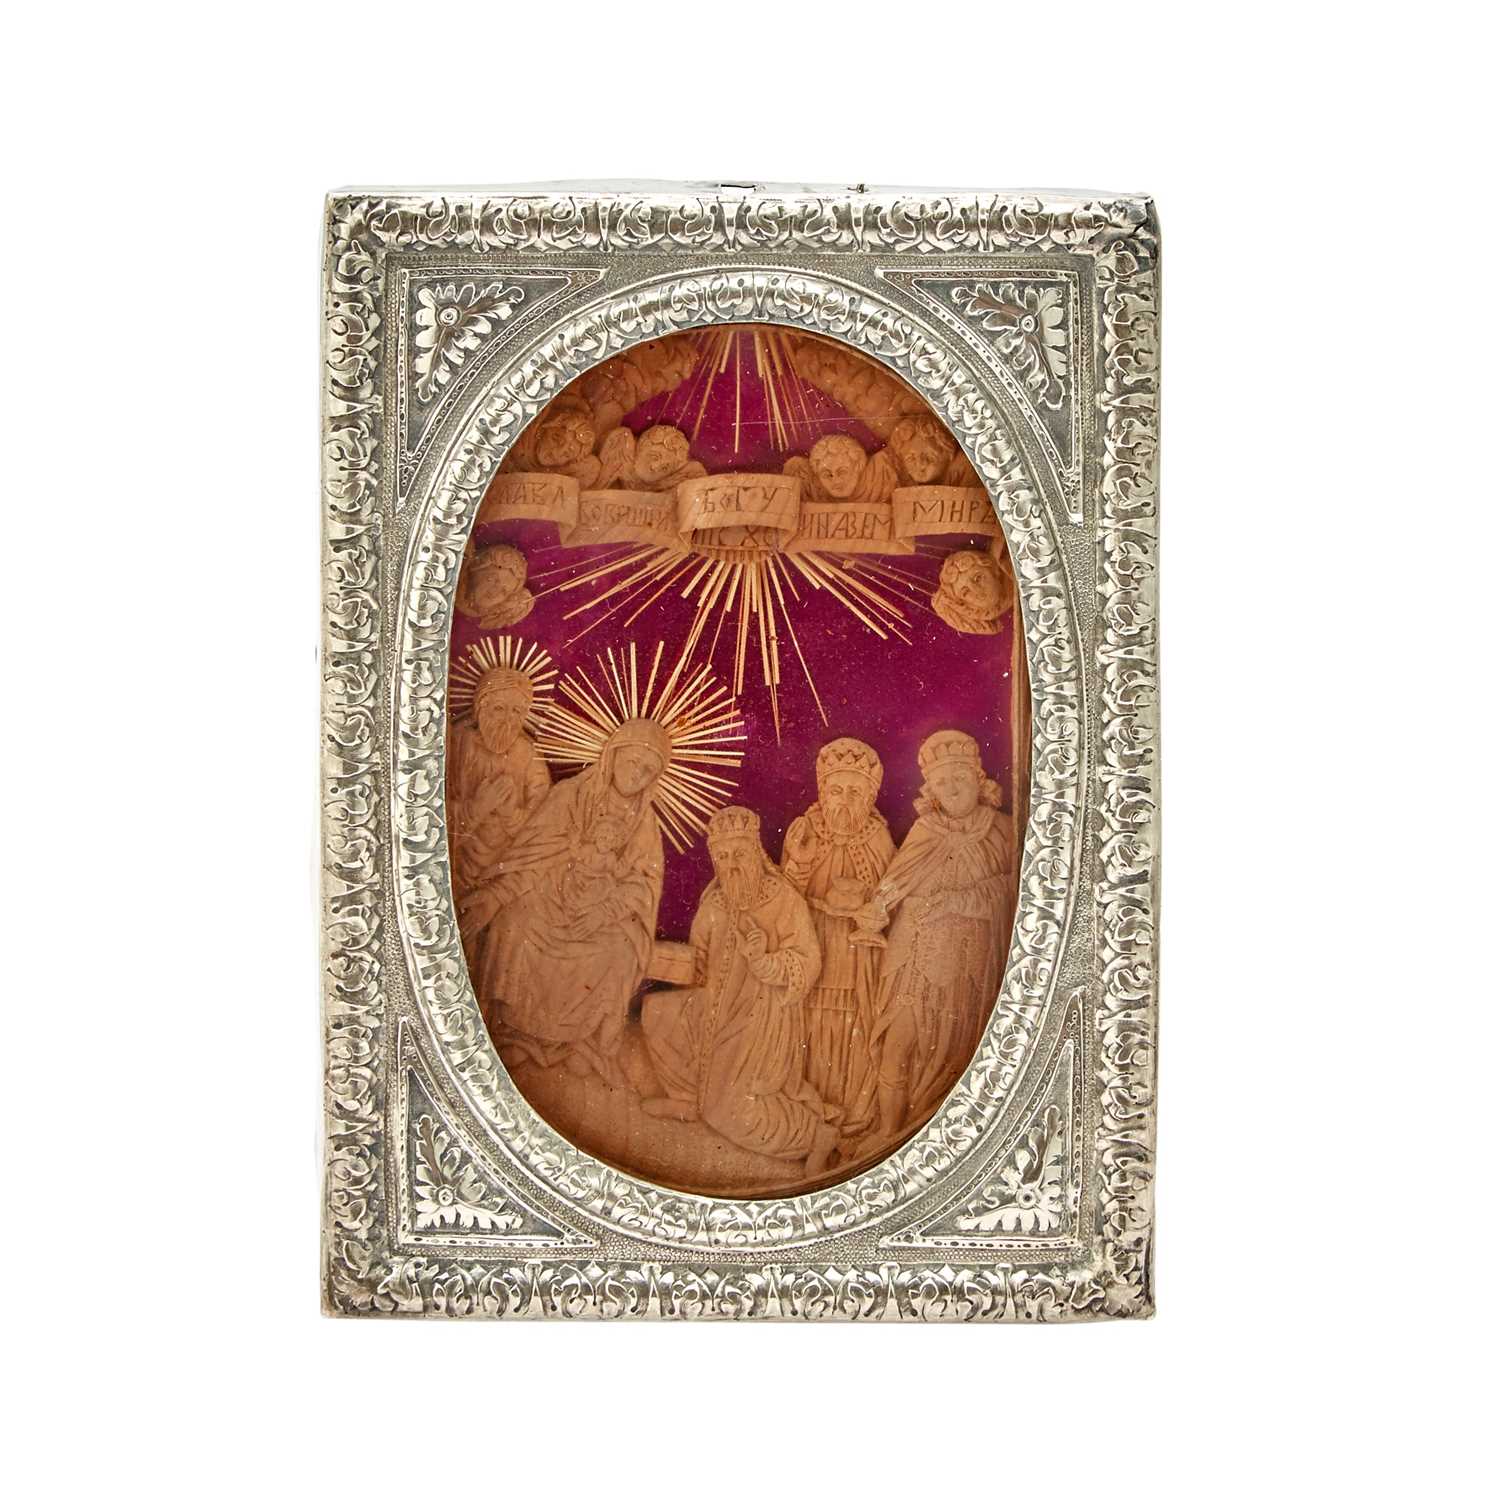 Lot 60 - Russian Silver and Carved Wood Icon of the Nativity